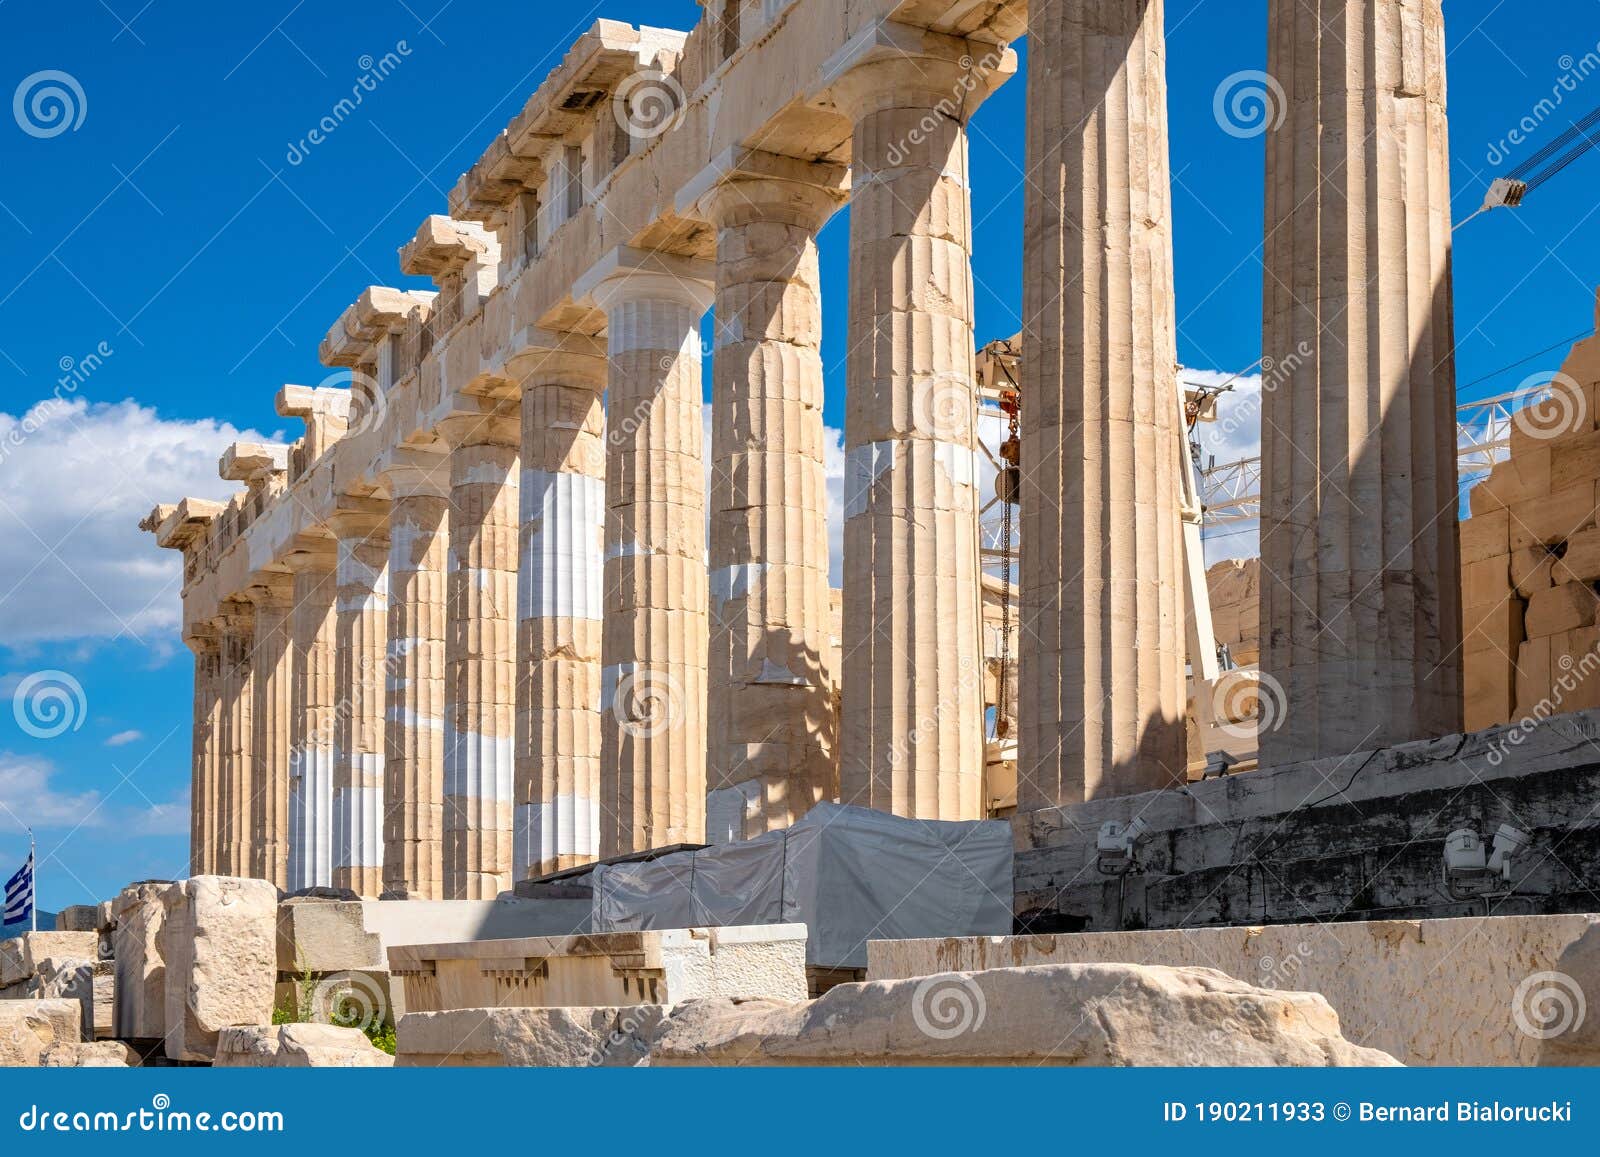 Panoramic View Of Parthenon - Temple Of Goddess Athena - Within Ancient ...